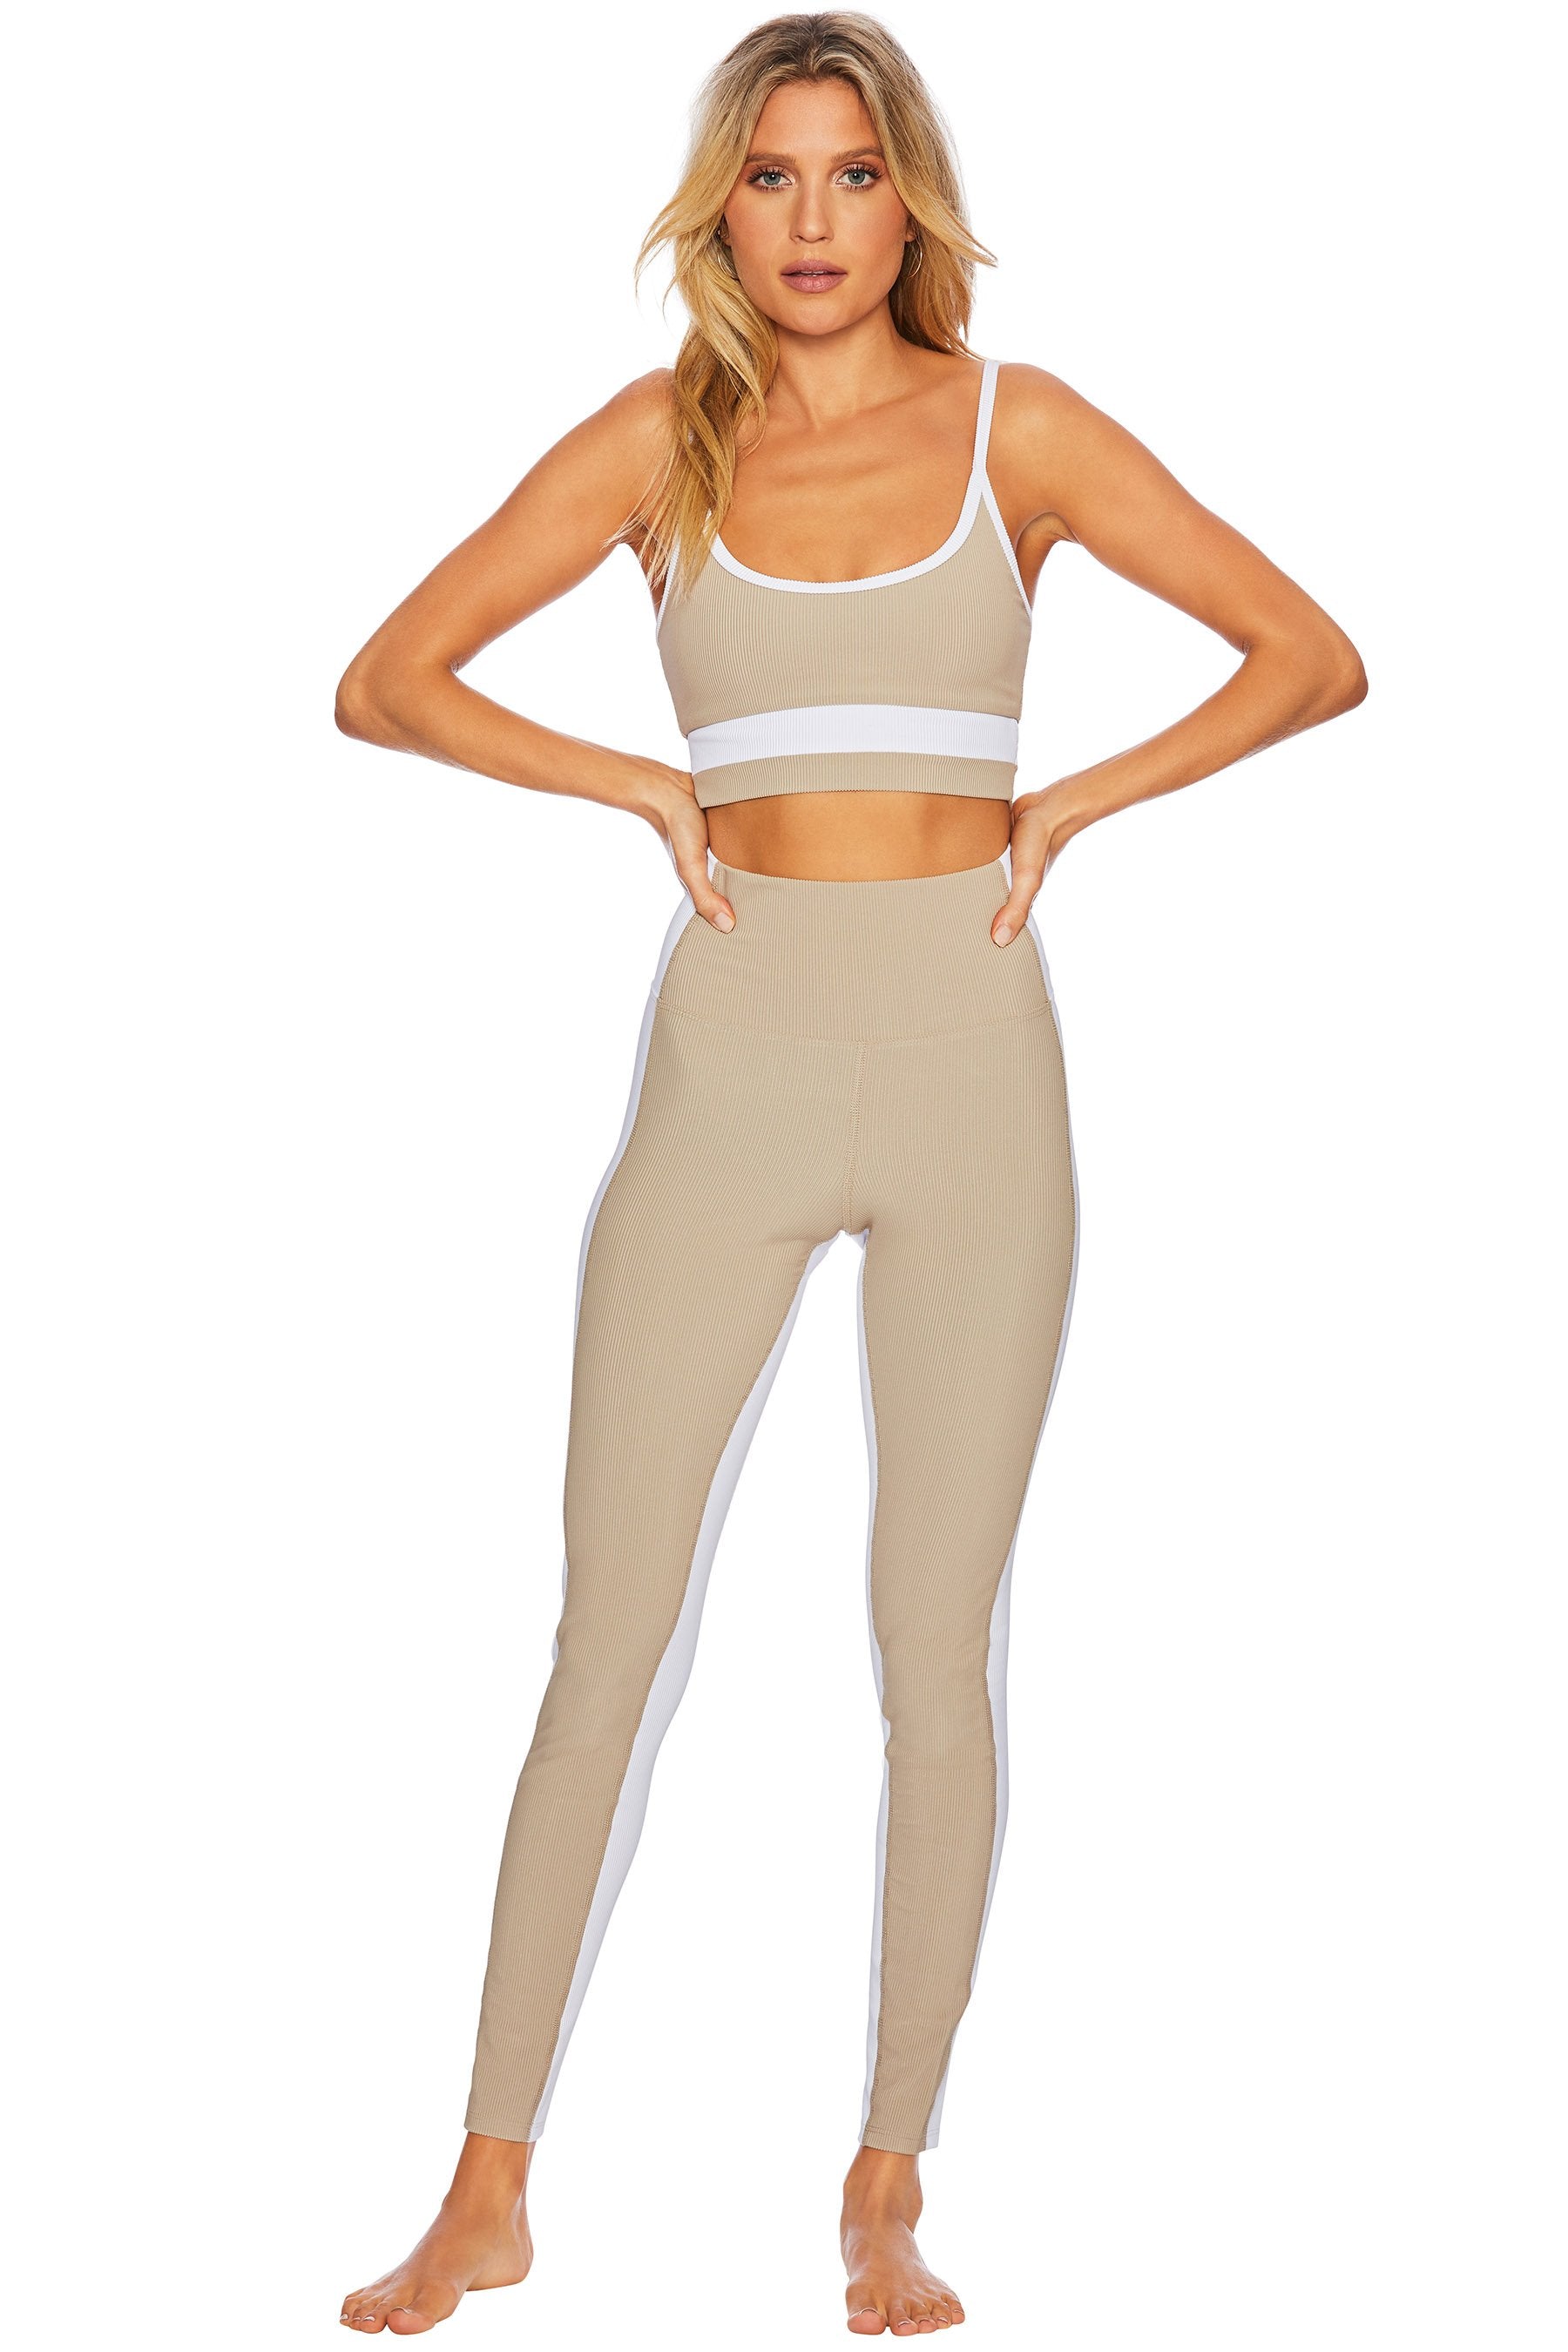 Beach Riot NWT Bailey Legging in Pastel Colorblock - Size Small